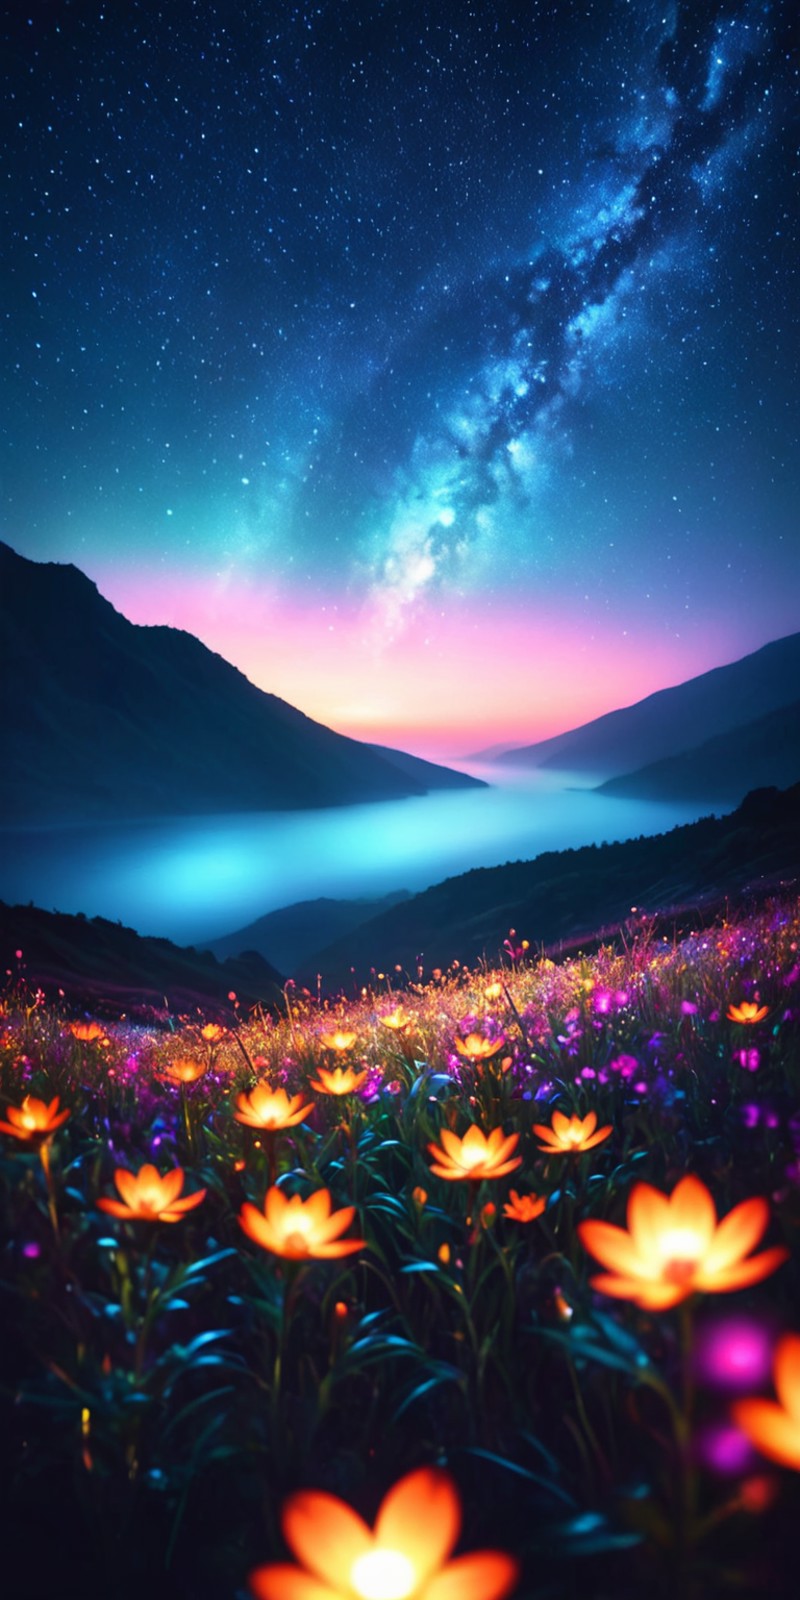 photography,(vibrant colors:0.6),
a fantastic landscape at night covered in glowing flowers,
<lora:M05_Intensify:1>